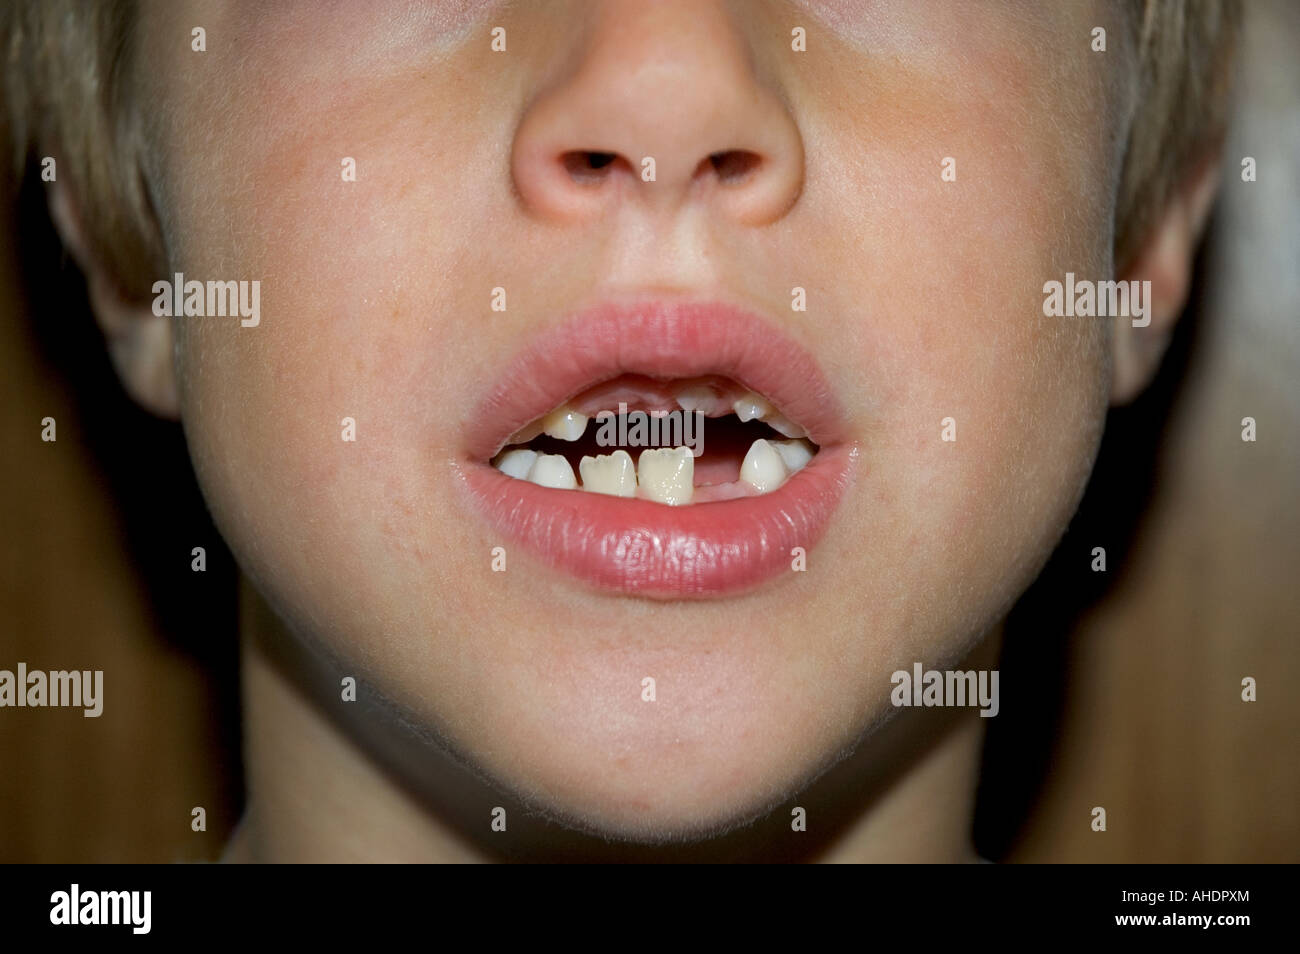 a young boy with his mouth open showing missing teeth Stock Photo